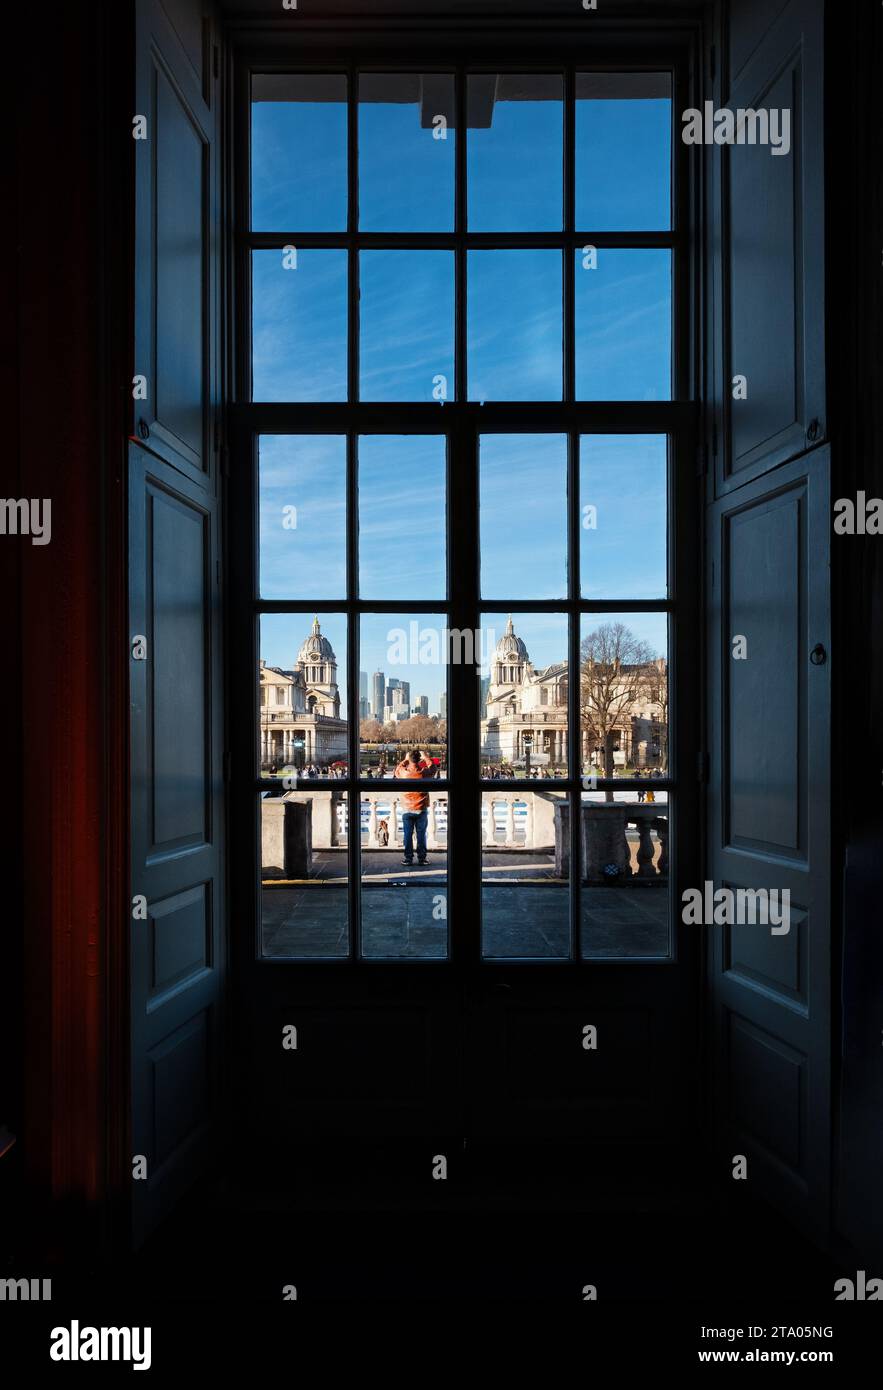 A view from a window inside the Queen's House towards the Royal Naval College Greenwich London. The view is distorted by the windows old glass panes Stock Photo